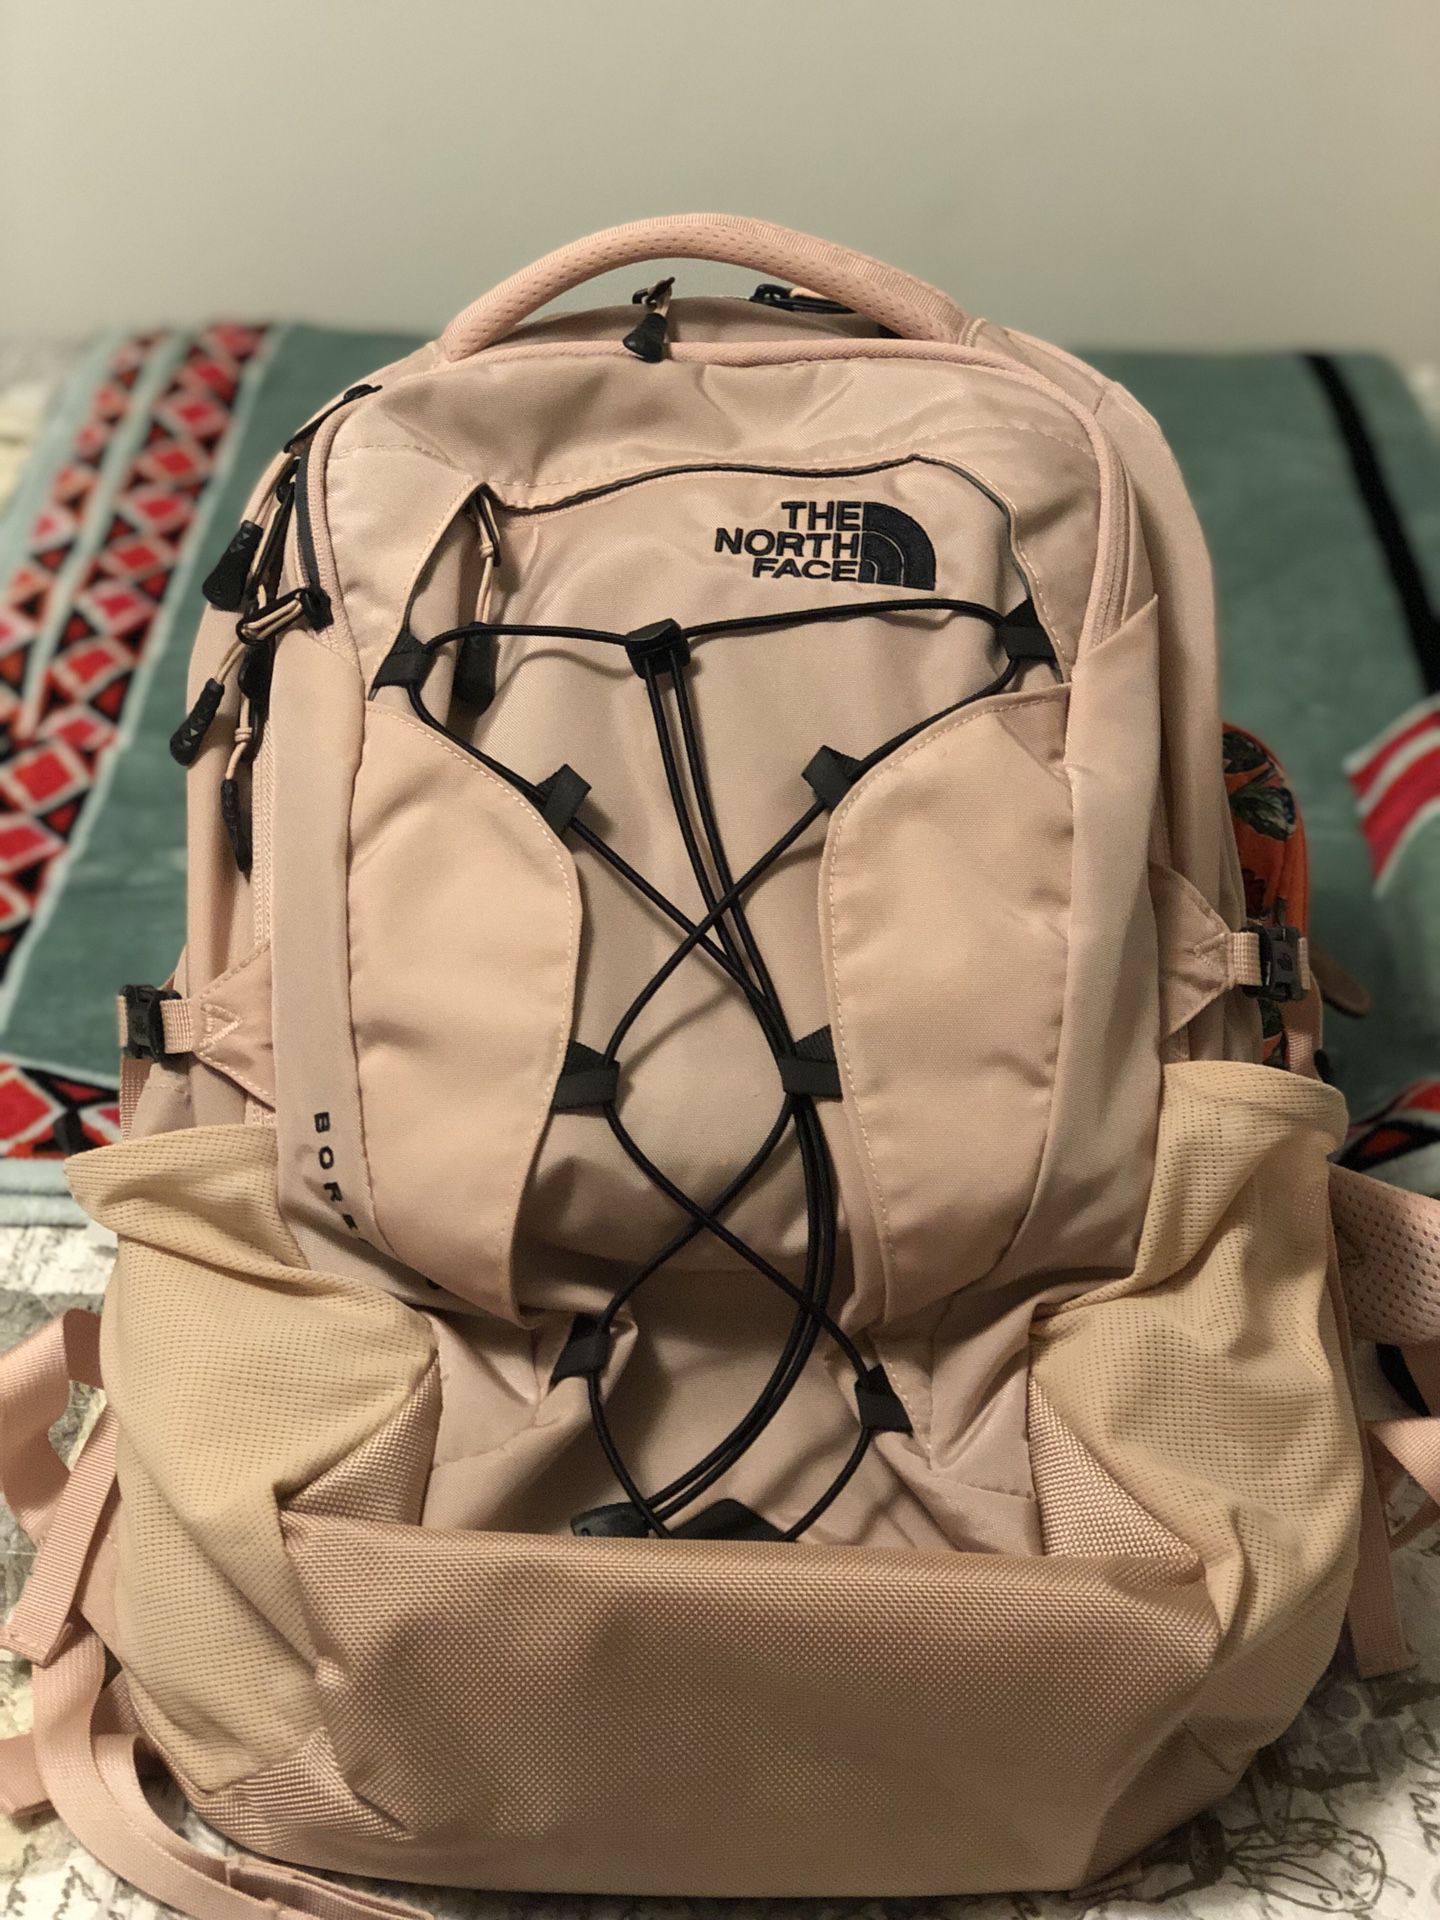 North face Women’s Borealis luxe backpack